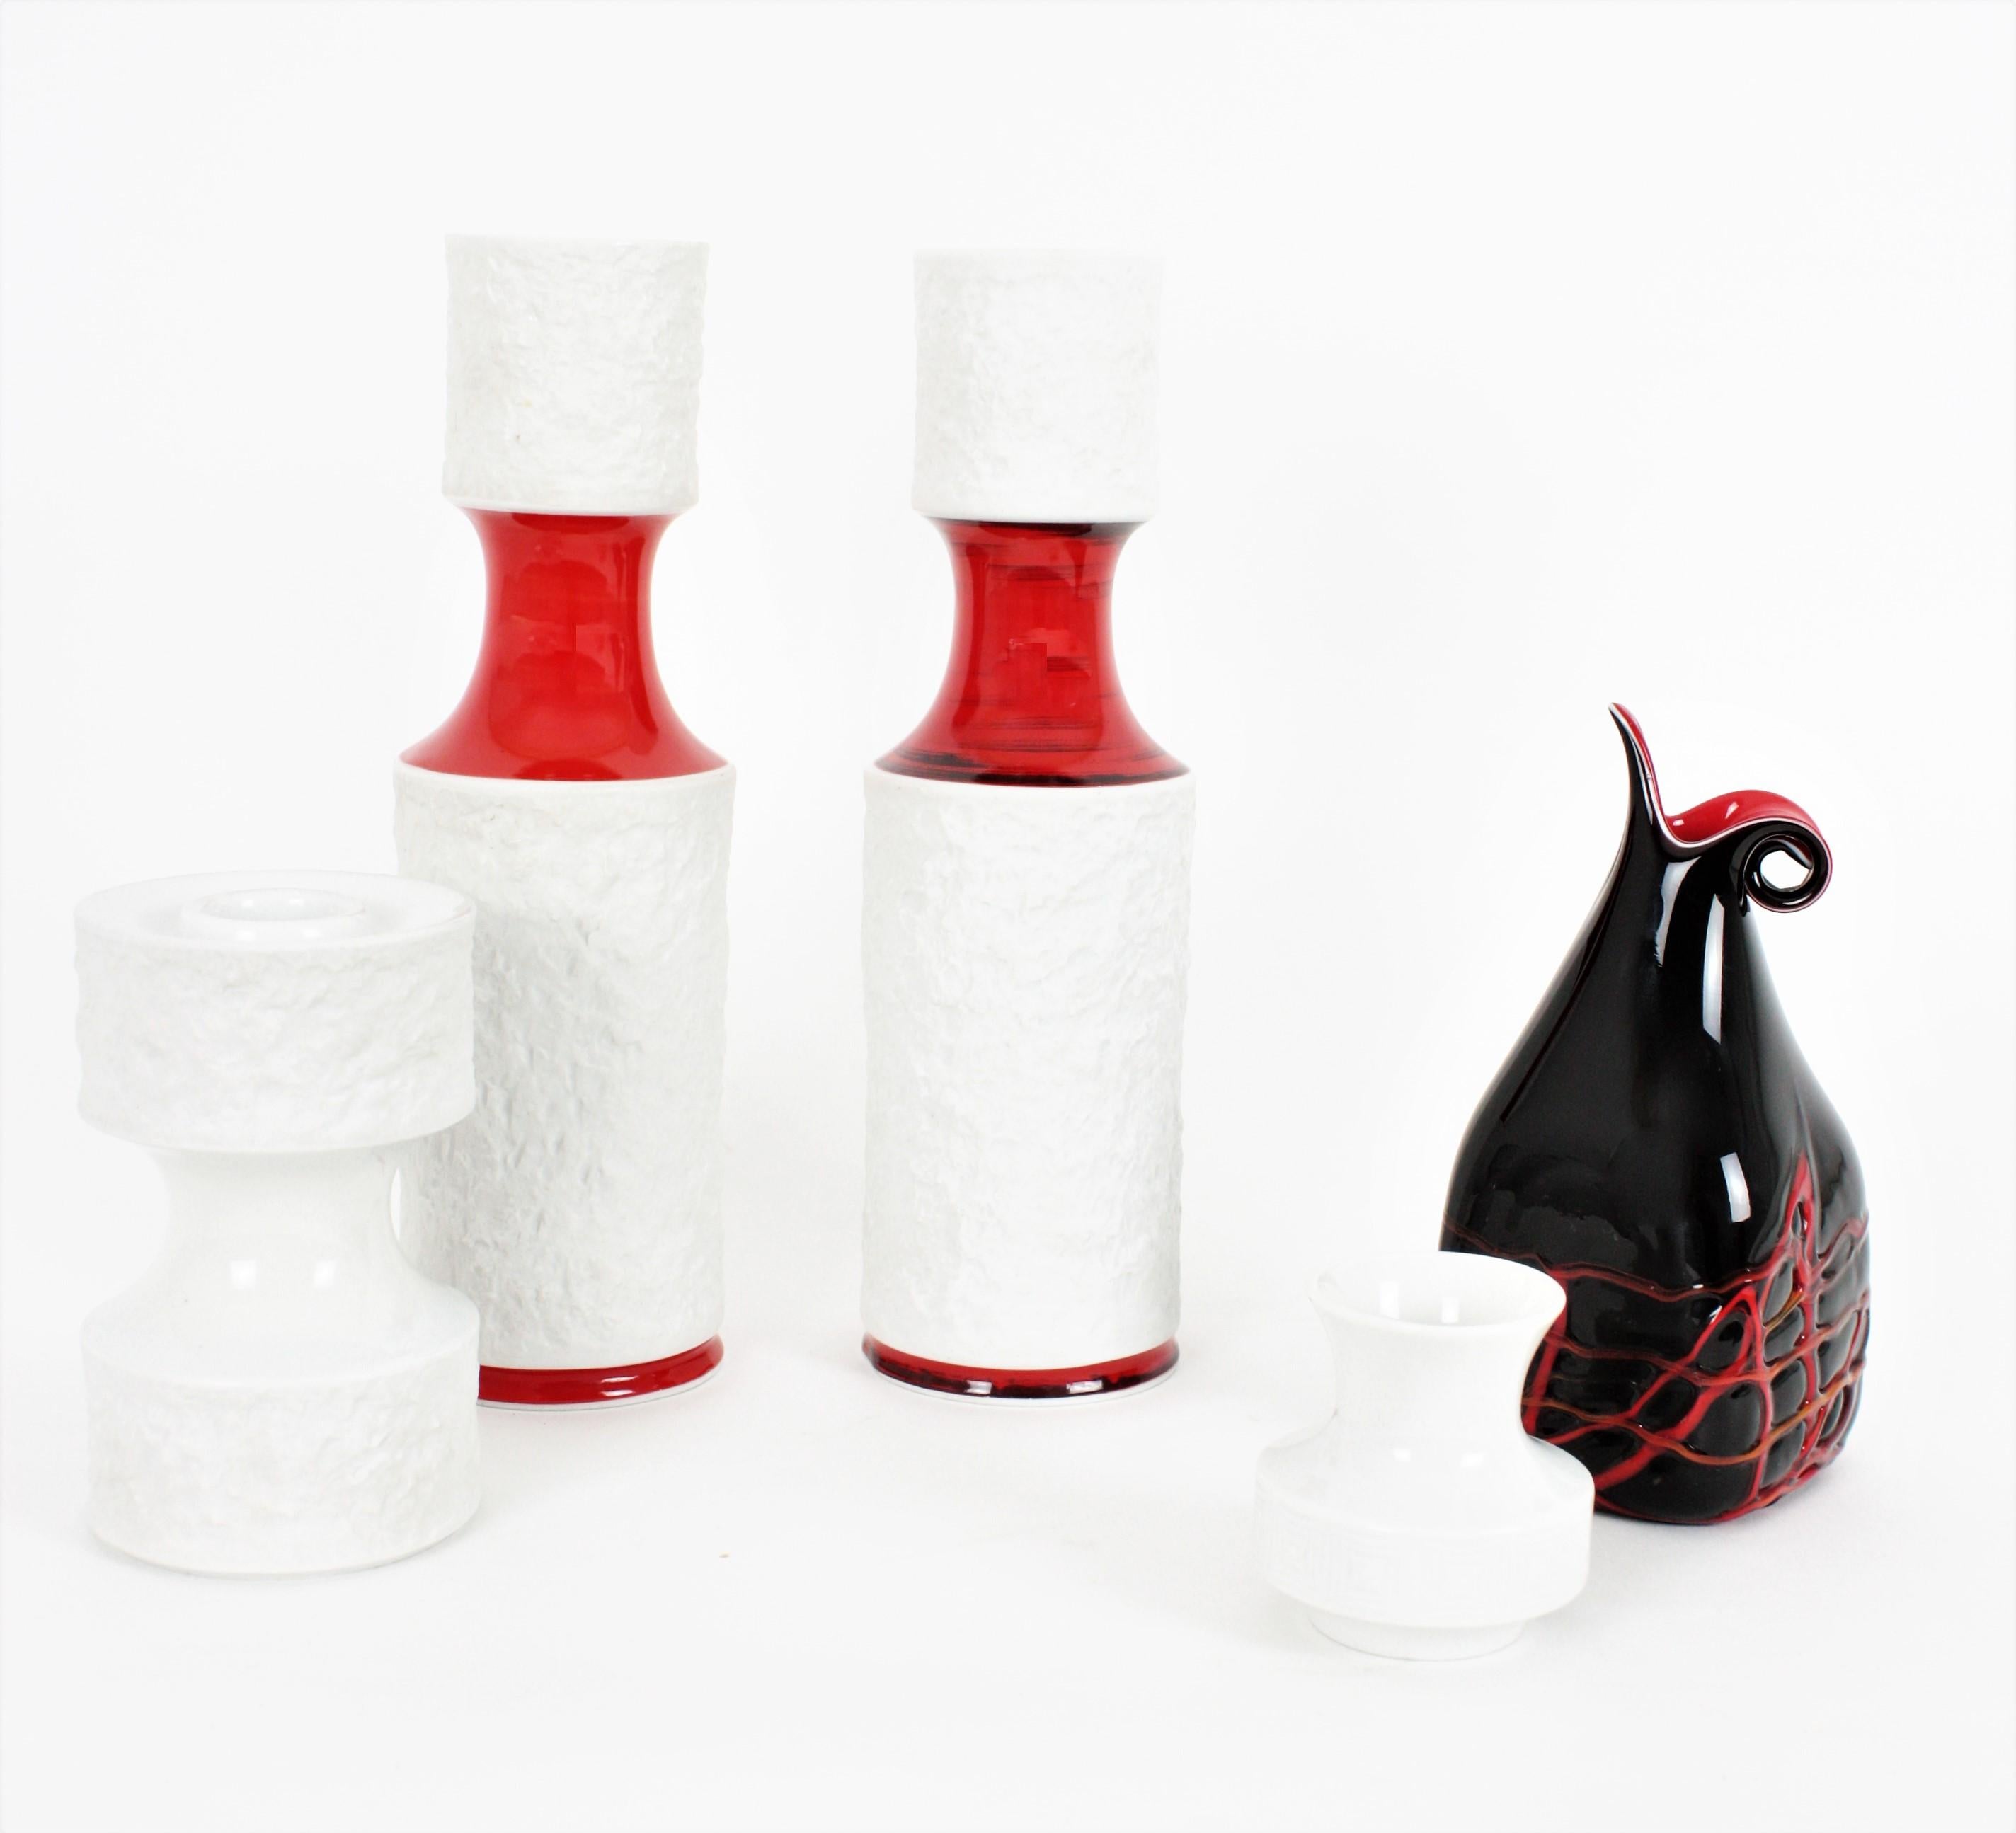 Mid-Century Modern Bavaria porcelain vases and candle holder by KPM 'Königliche Porzellan-Manufaktur', Germany, 1960s
The set is composed by a pair of white unglazed textured porcelain vases with glazed red accents, an small vase and a candle